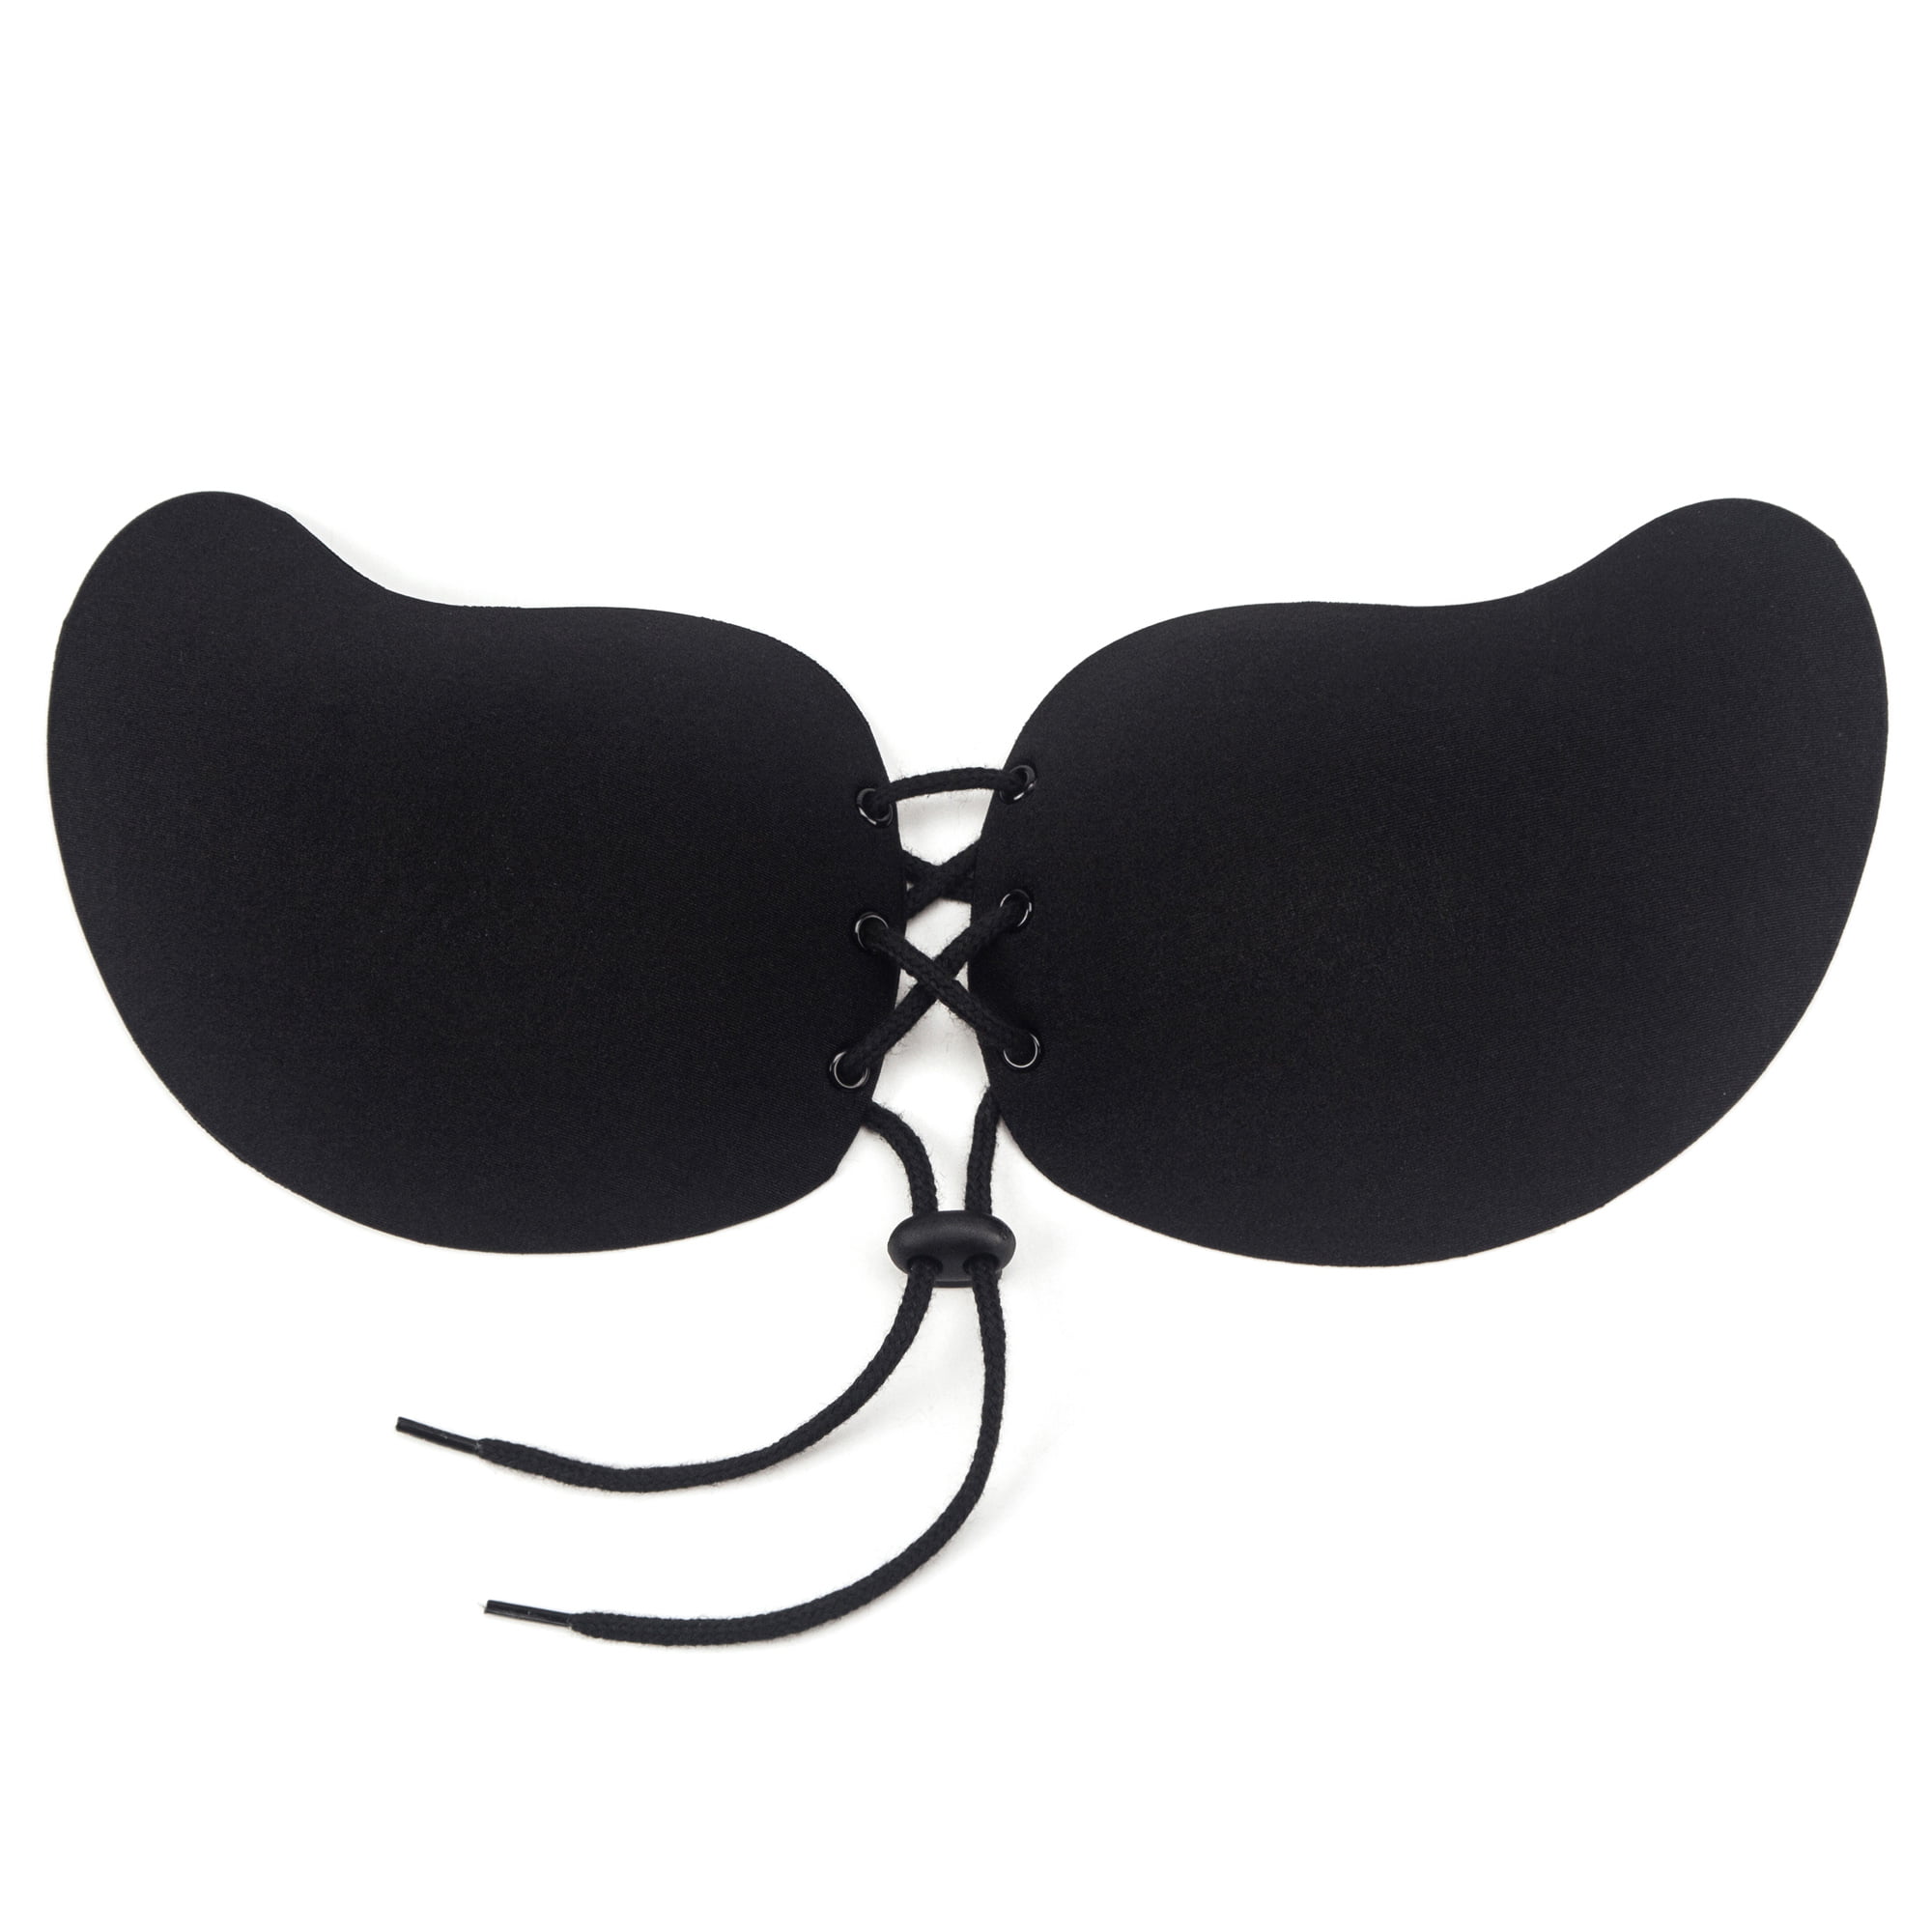 Details about  / Autbre Women/'s Push up Backless Strapless Bra Adhesive Plunge Invisible Reusable